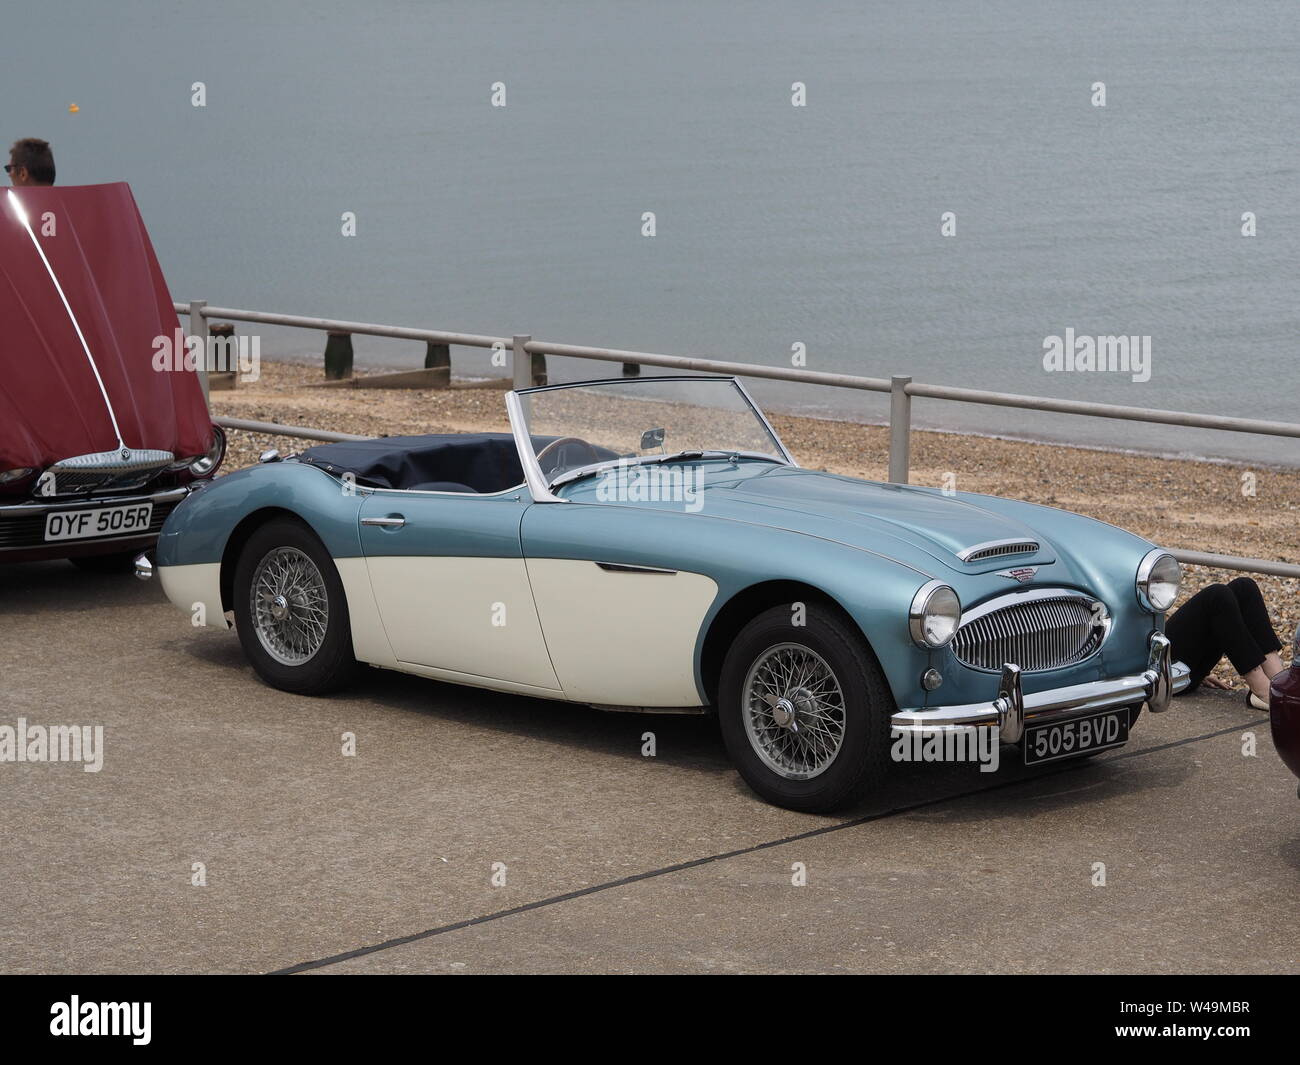 Minster on Sea, Kent, UK. 21st July, 2019. Photos from the annual display of classic cars along the Minster leas promenade organised by the Sweet Hut. Credit: James Bell/Alamy Live News Stock Photo